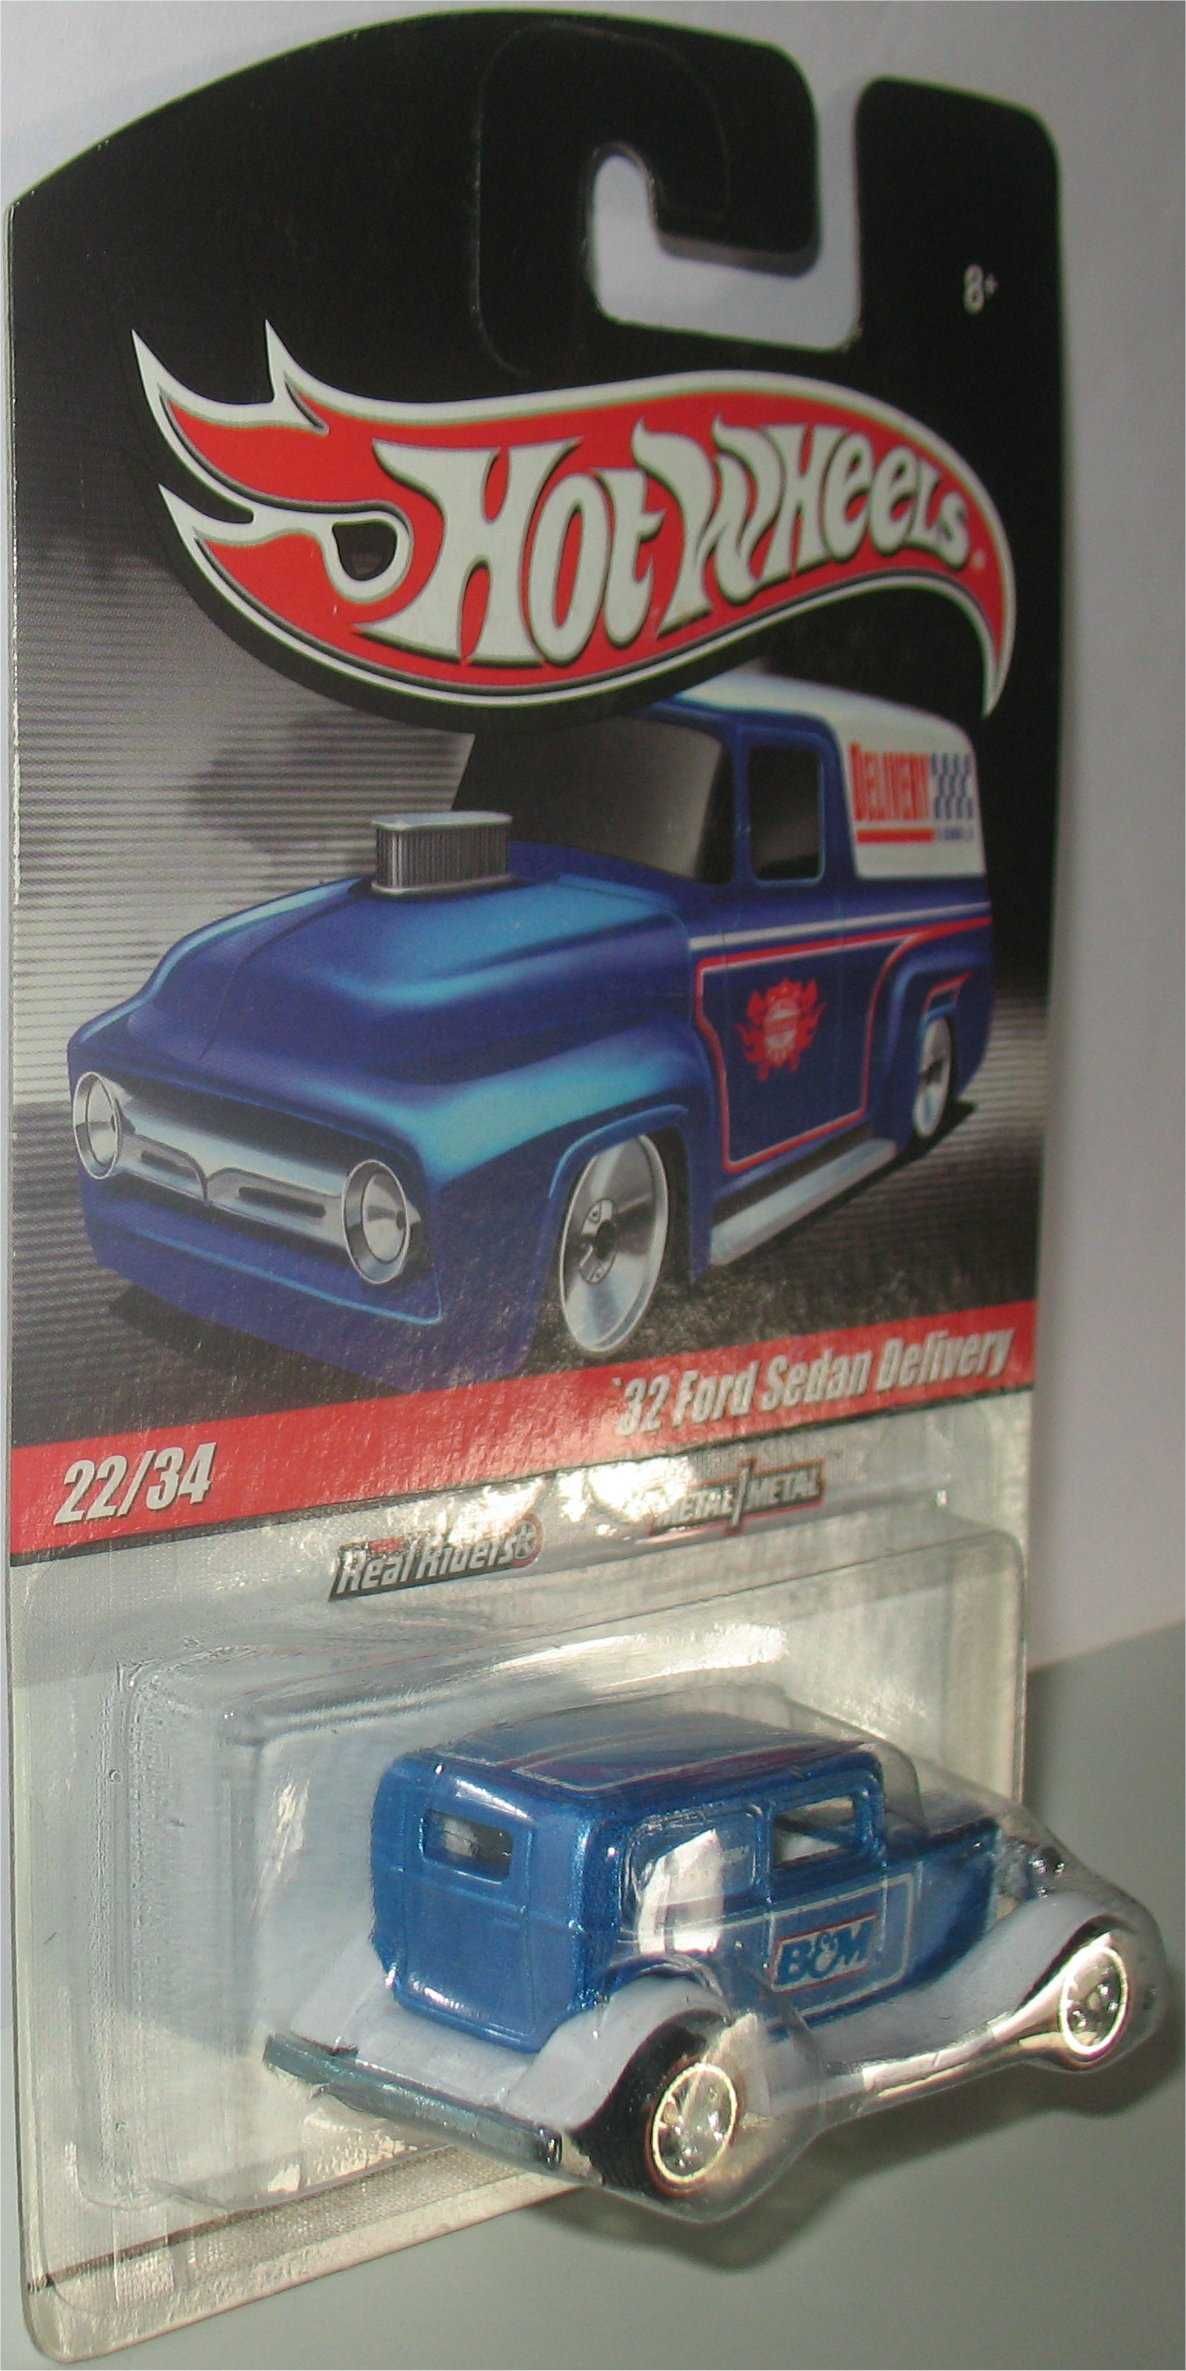 Hot Wheels - 32 Ford Sedan Delivery (2010)